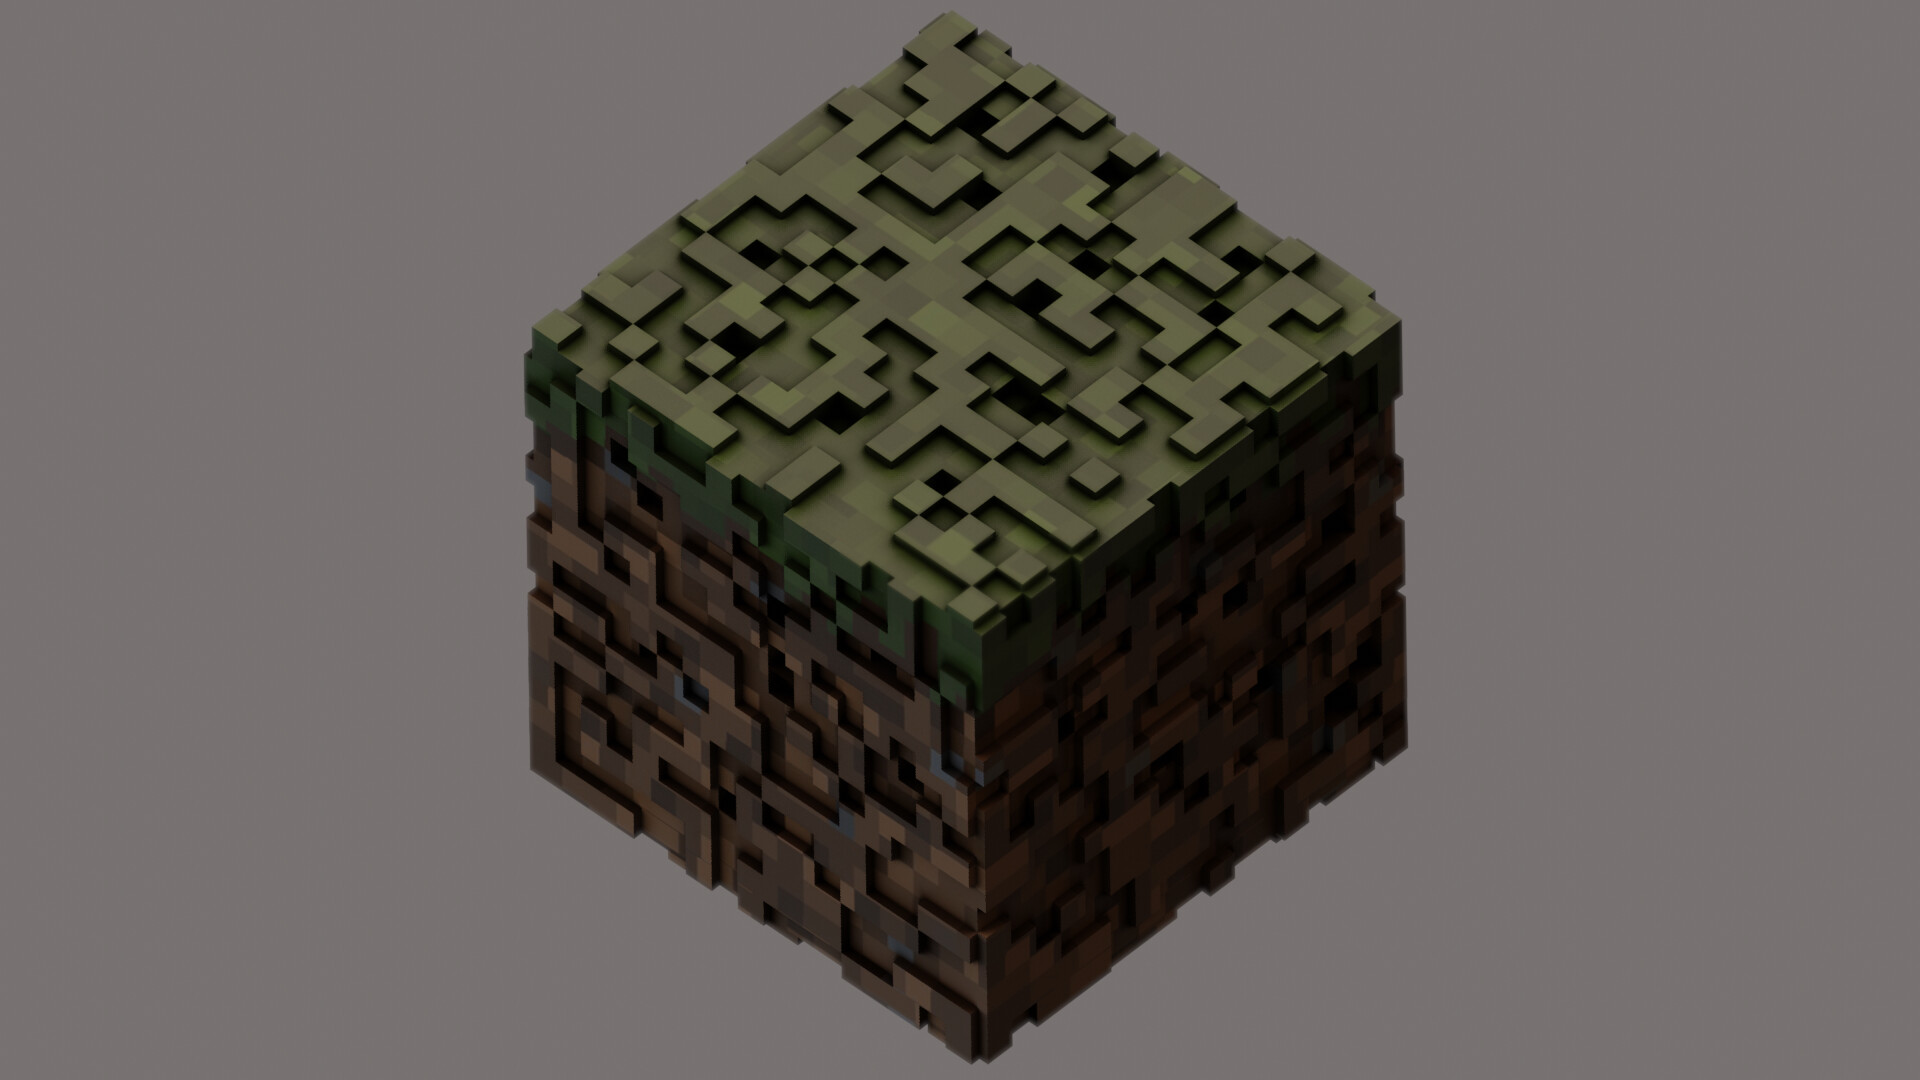 Made a beautiful grass block using Blender as a test. Planning to make more  3D Minecraft in the future! : r/Minecraft